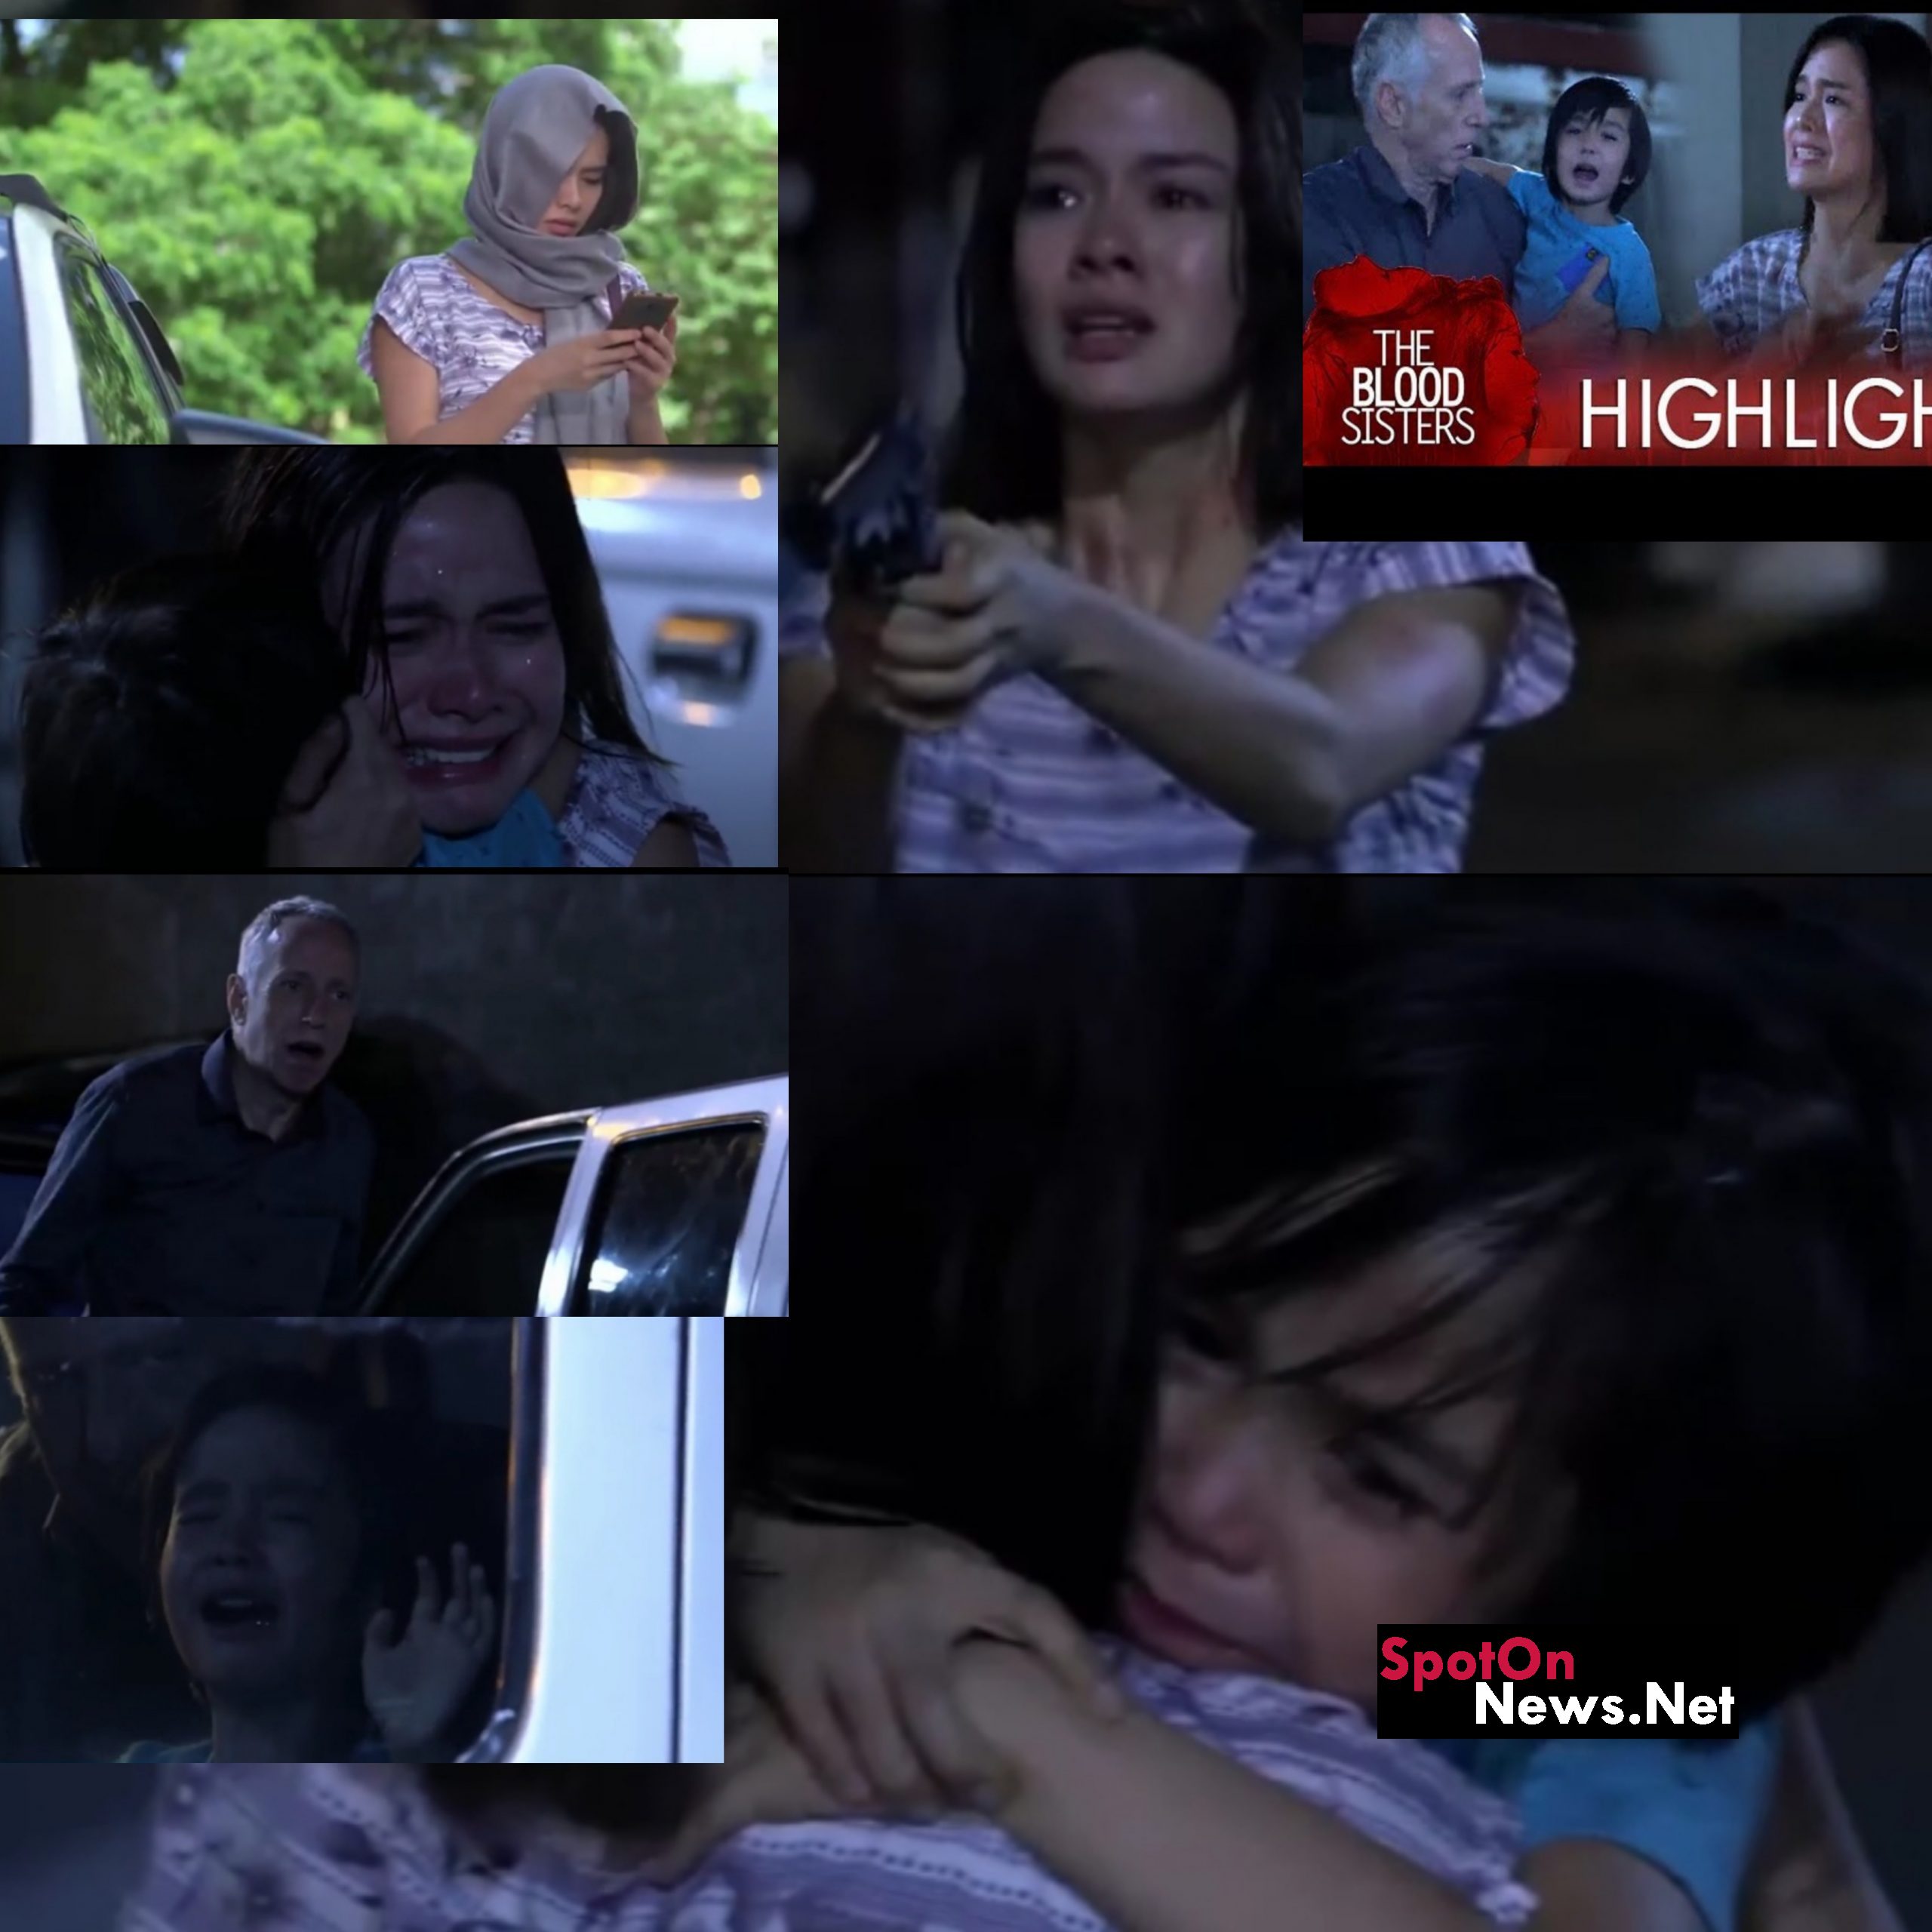 The Blood Sisters Episode 55 Rocco sold Jolo: Will Erika be able to save her son?